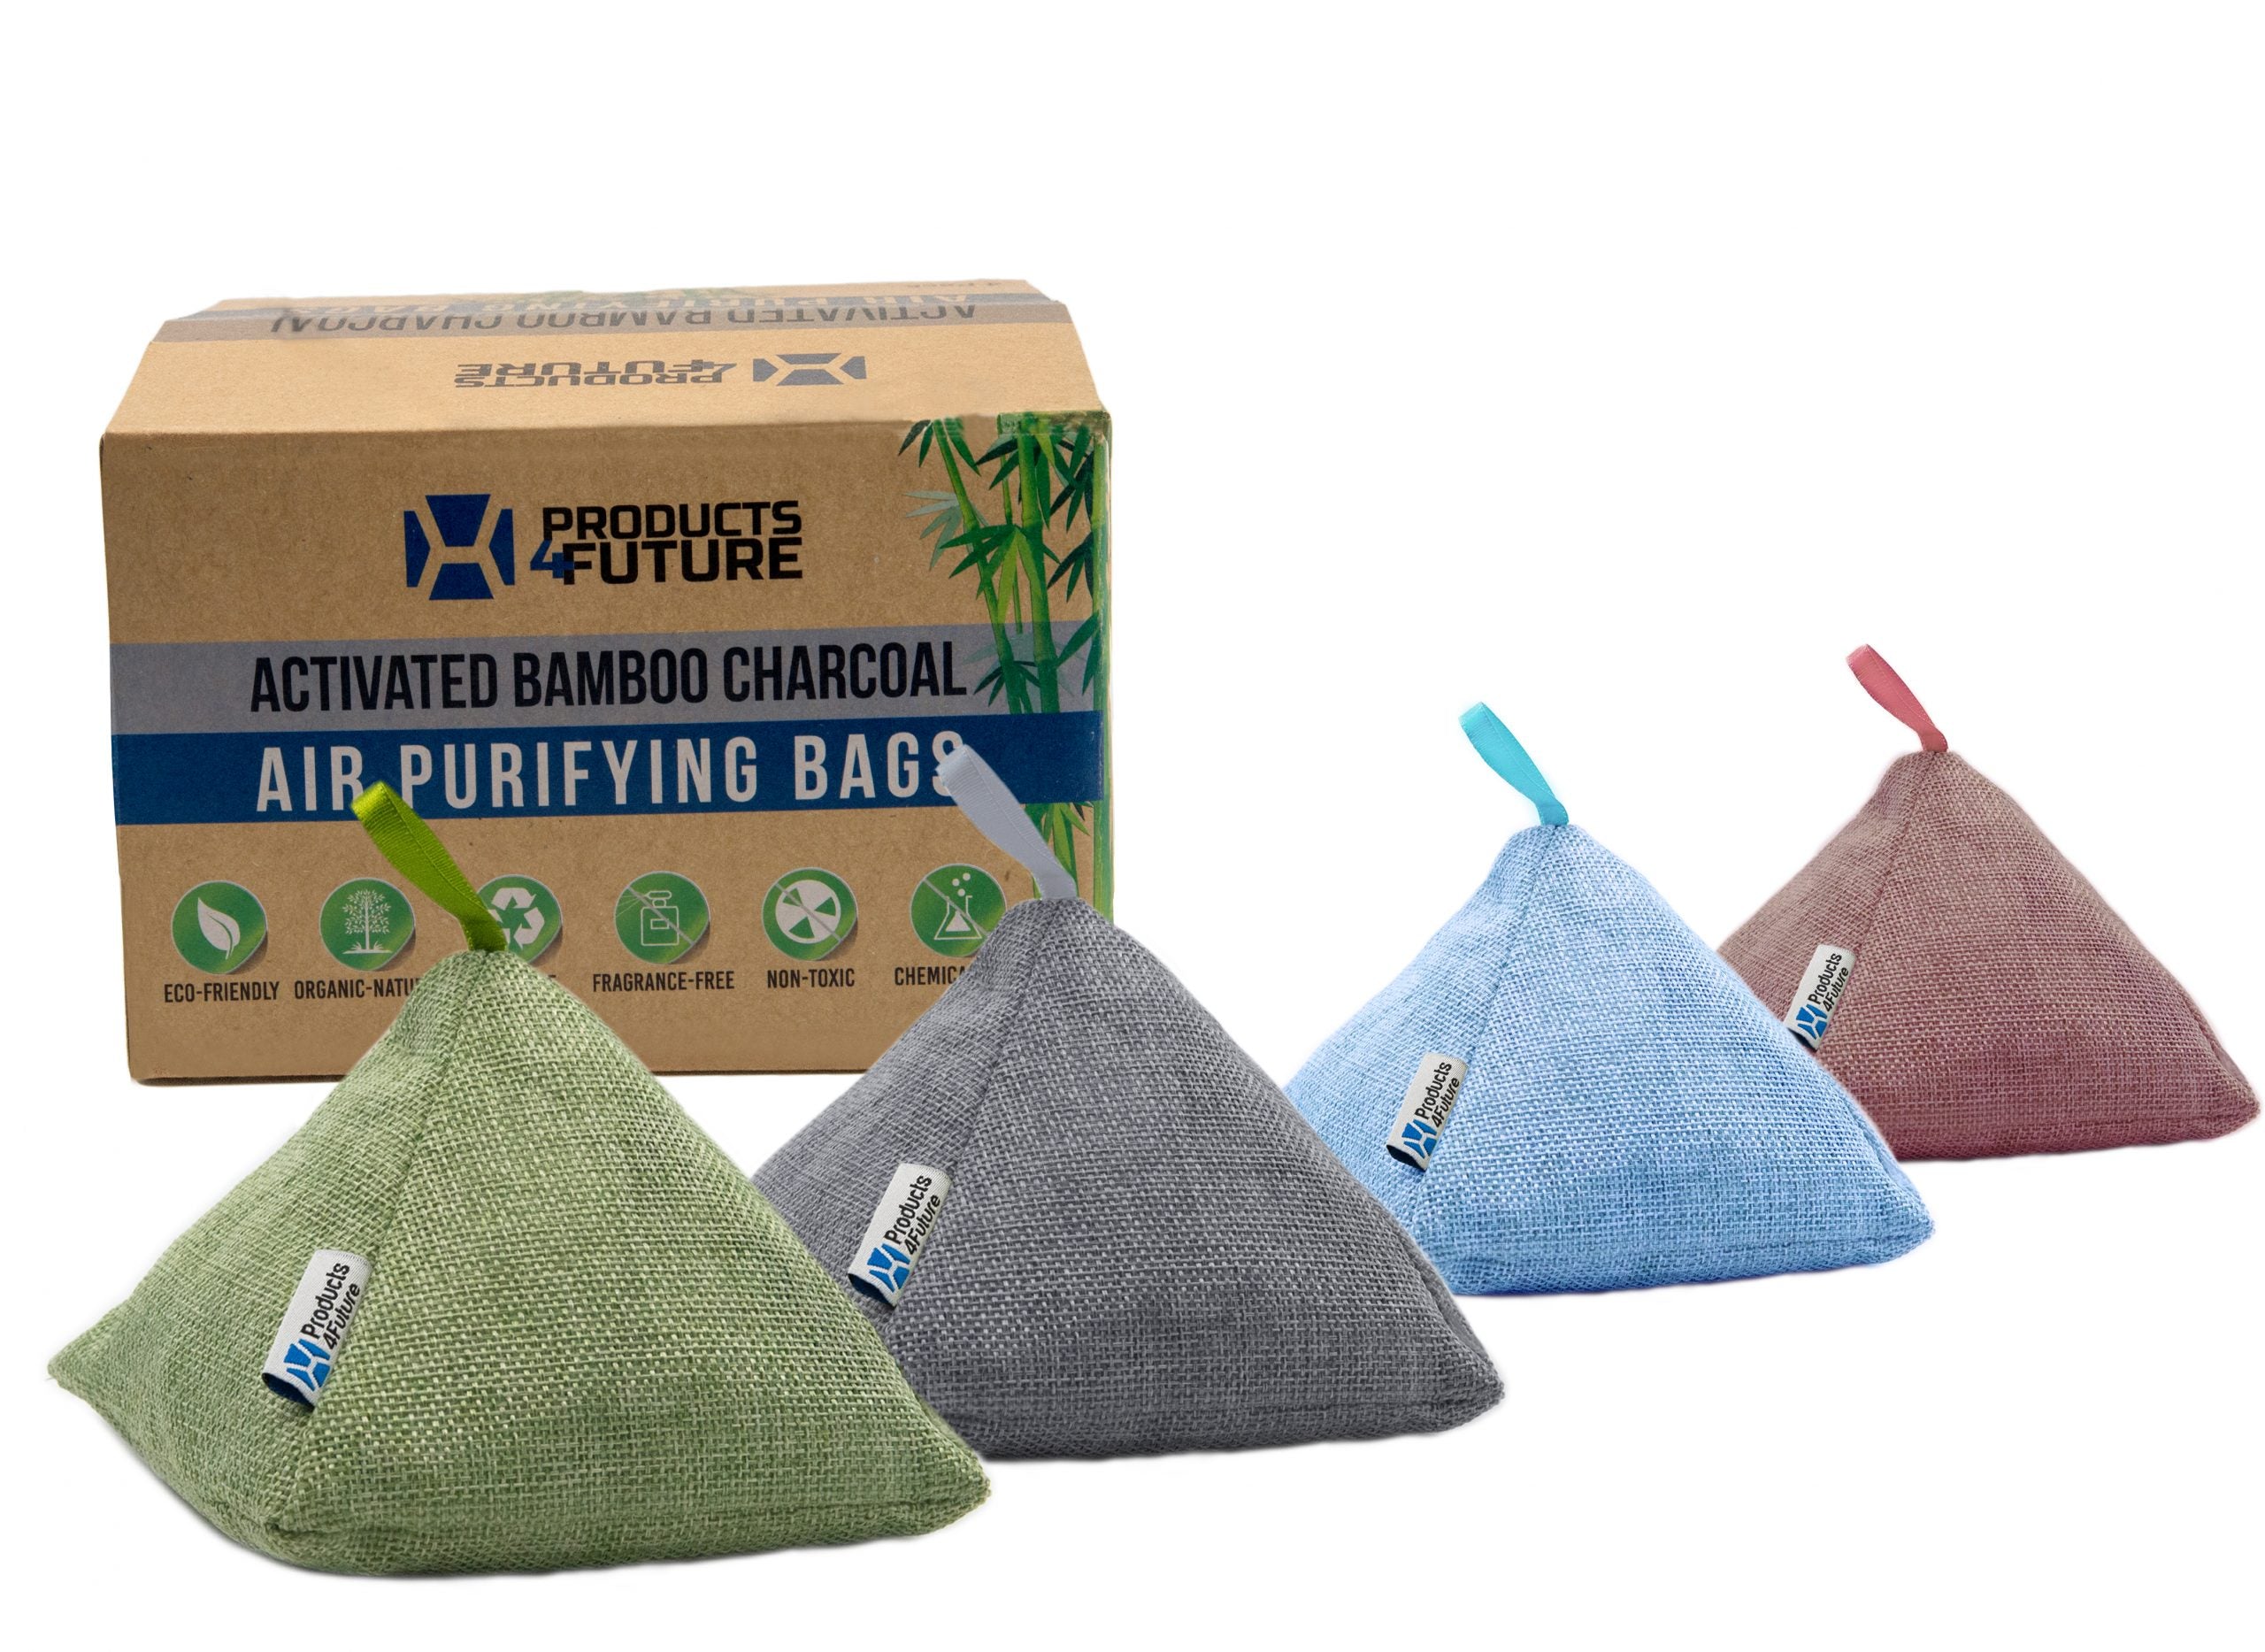 Natural Activated Bamboo Charcoal Air Purifying Bags - 4 Pack of 200g